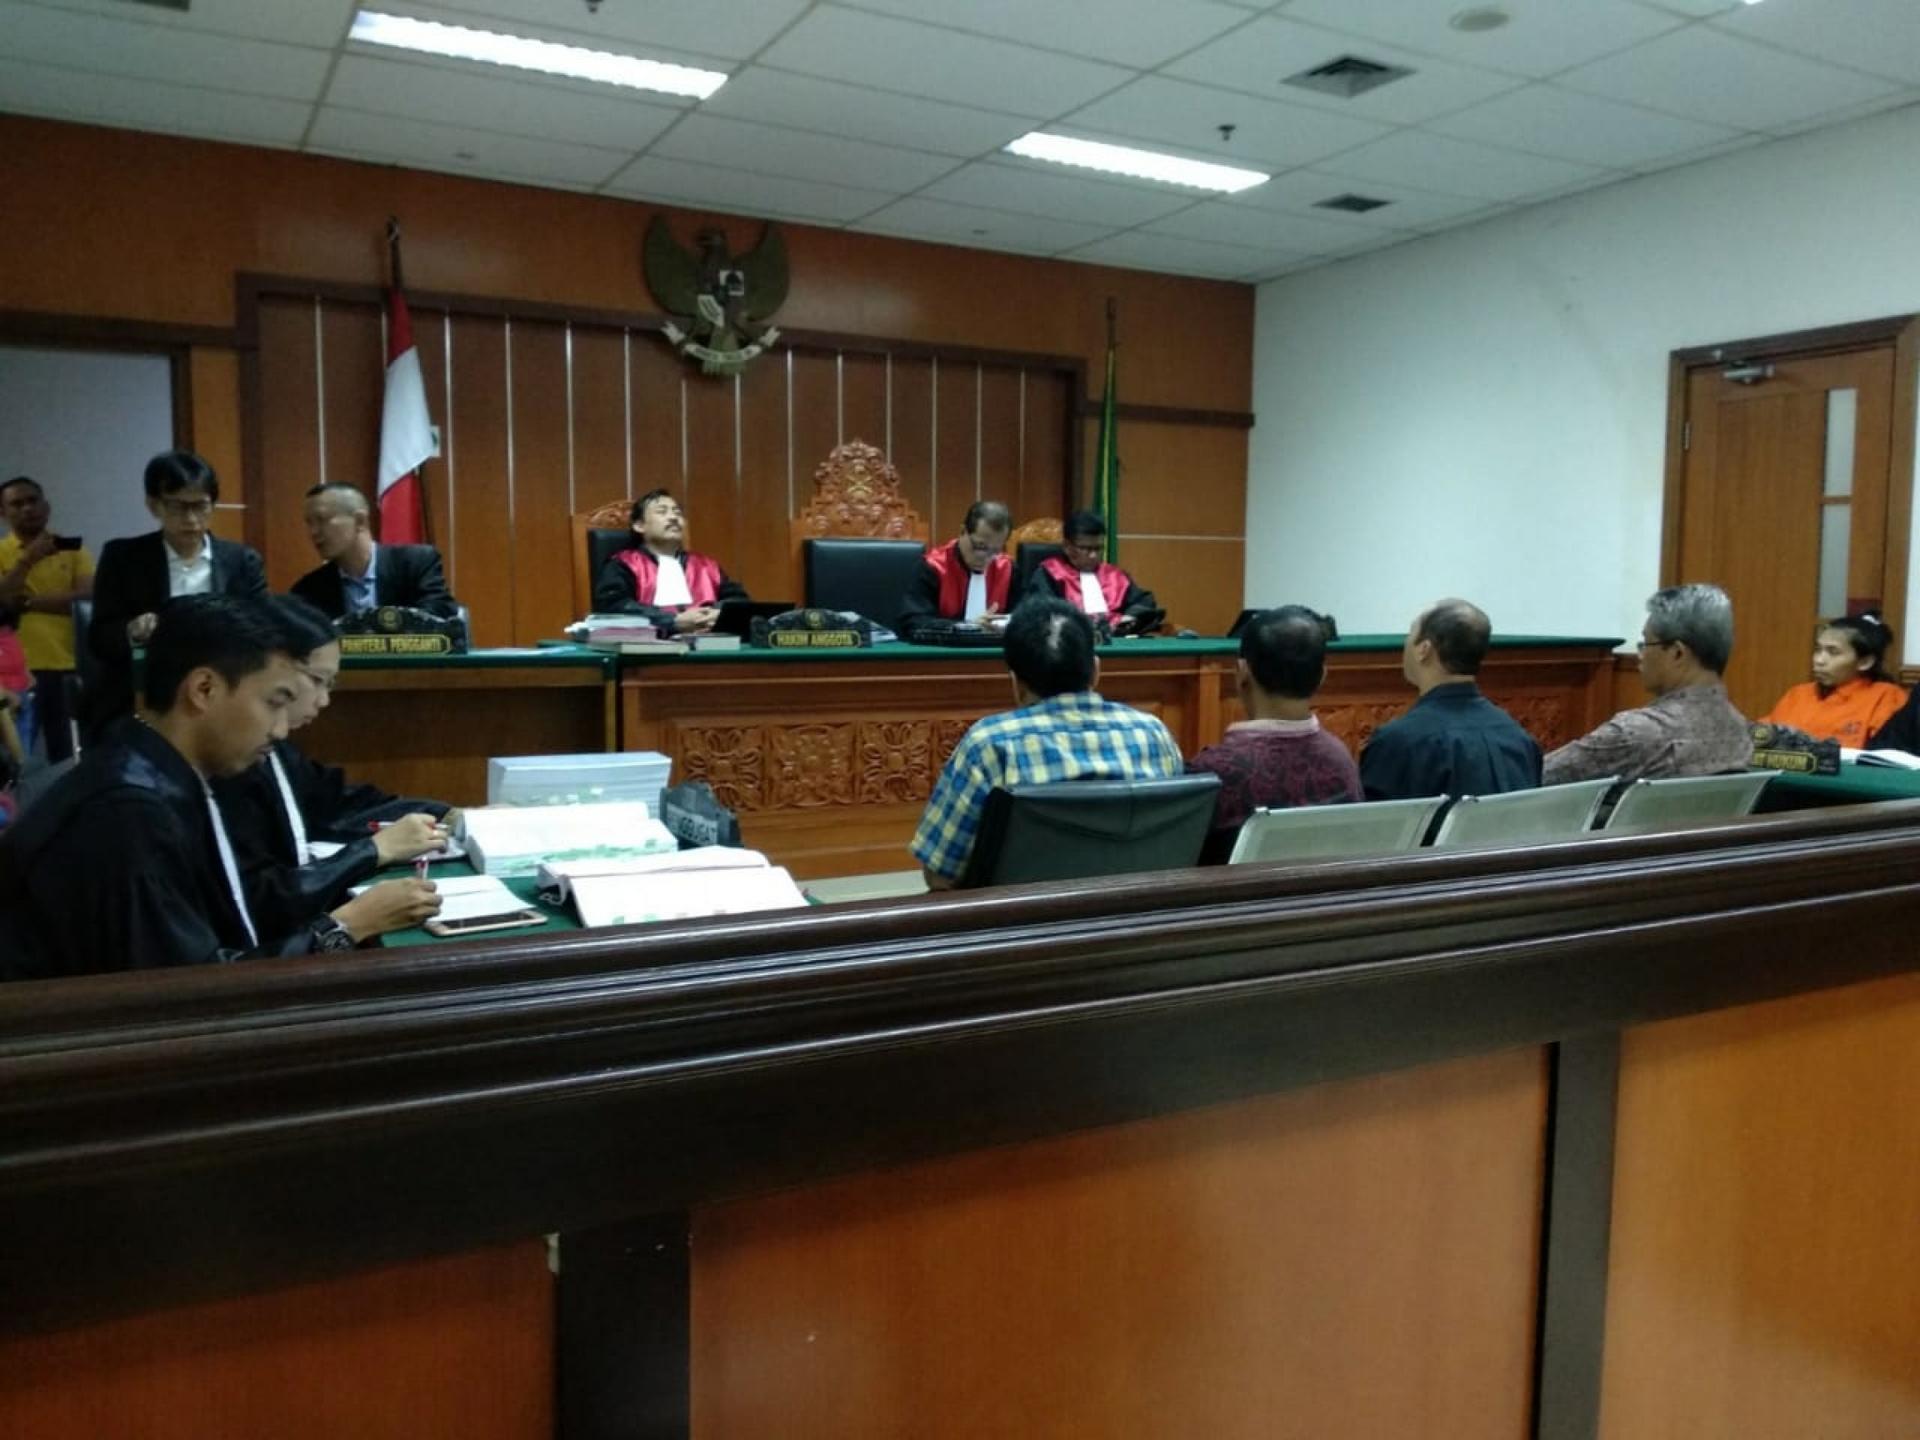 Courtroom scene with four witnesses and judge